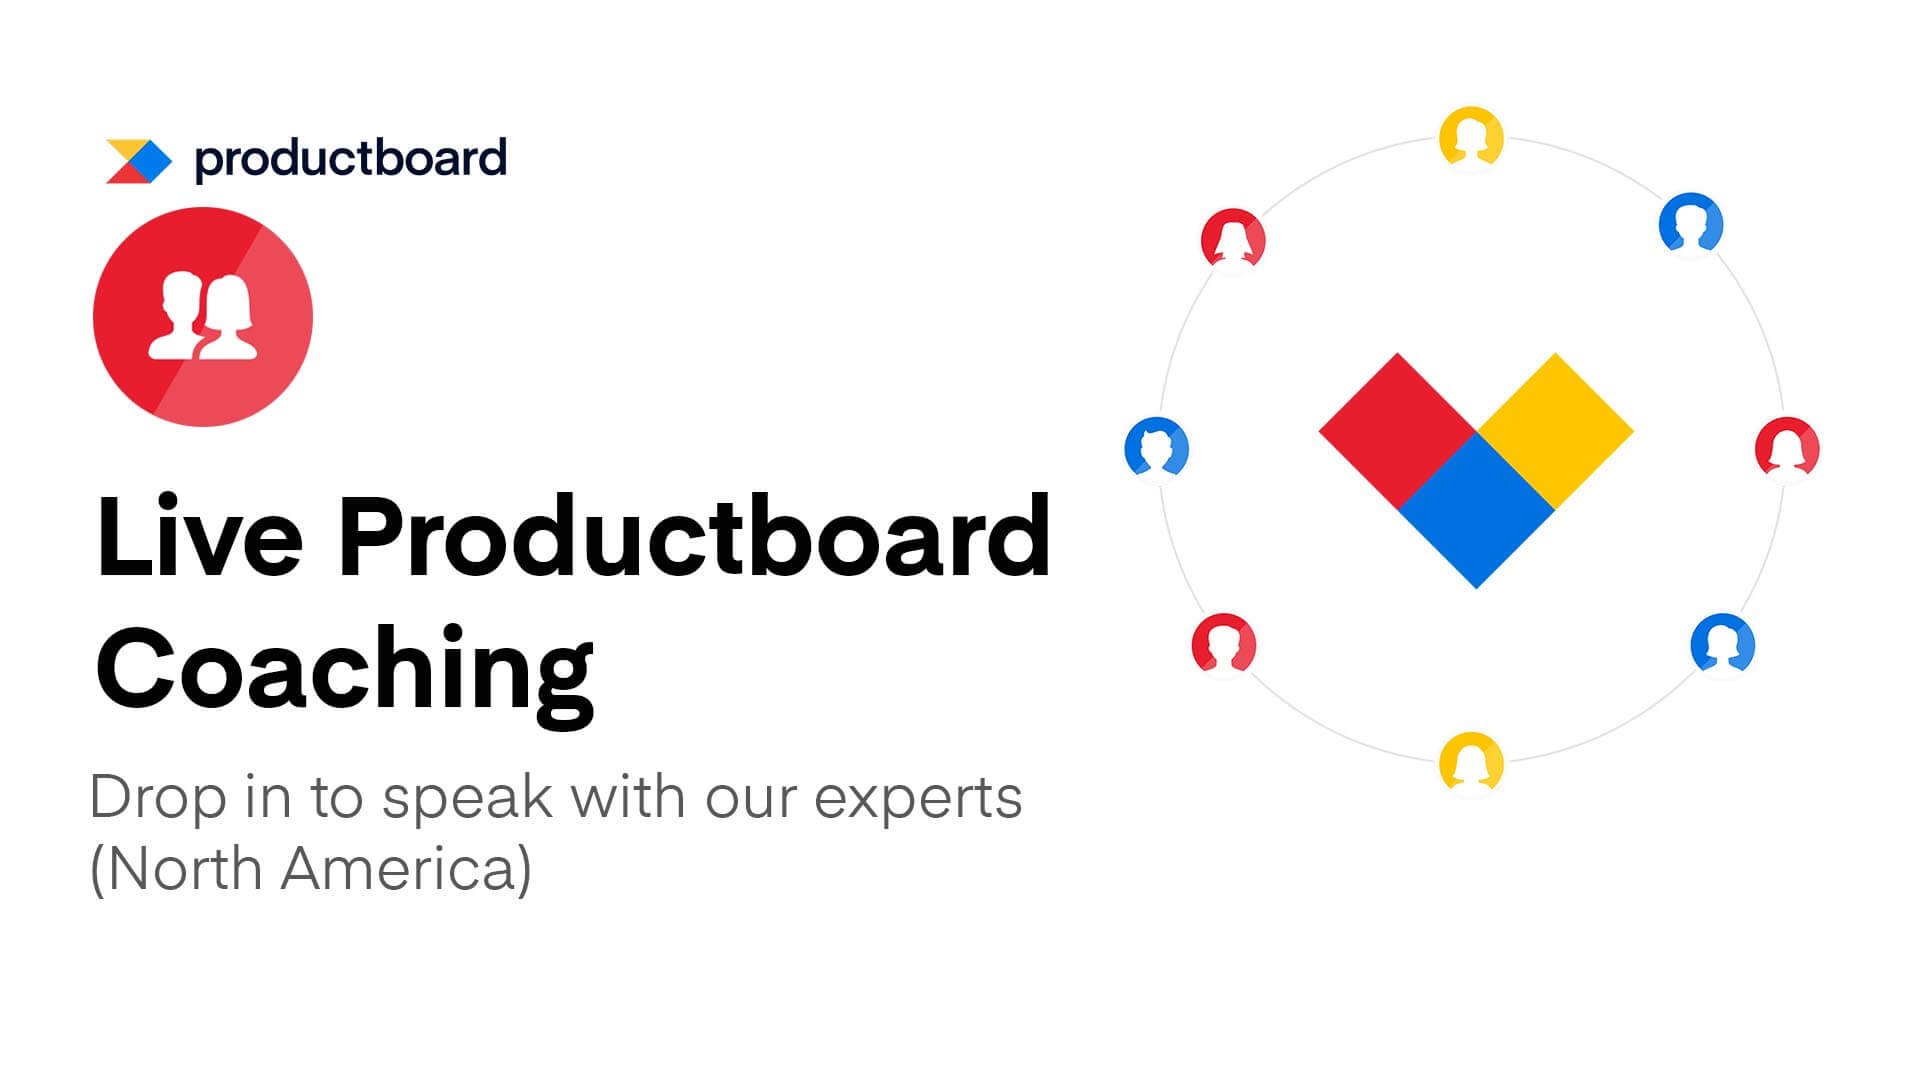 2/17 Live Productboard Coaching (North America)